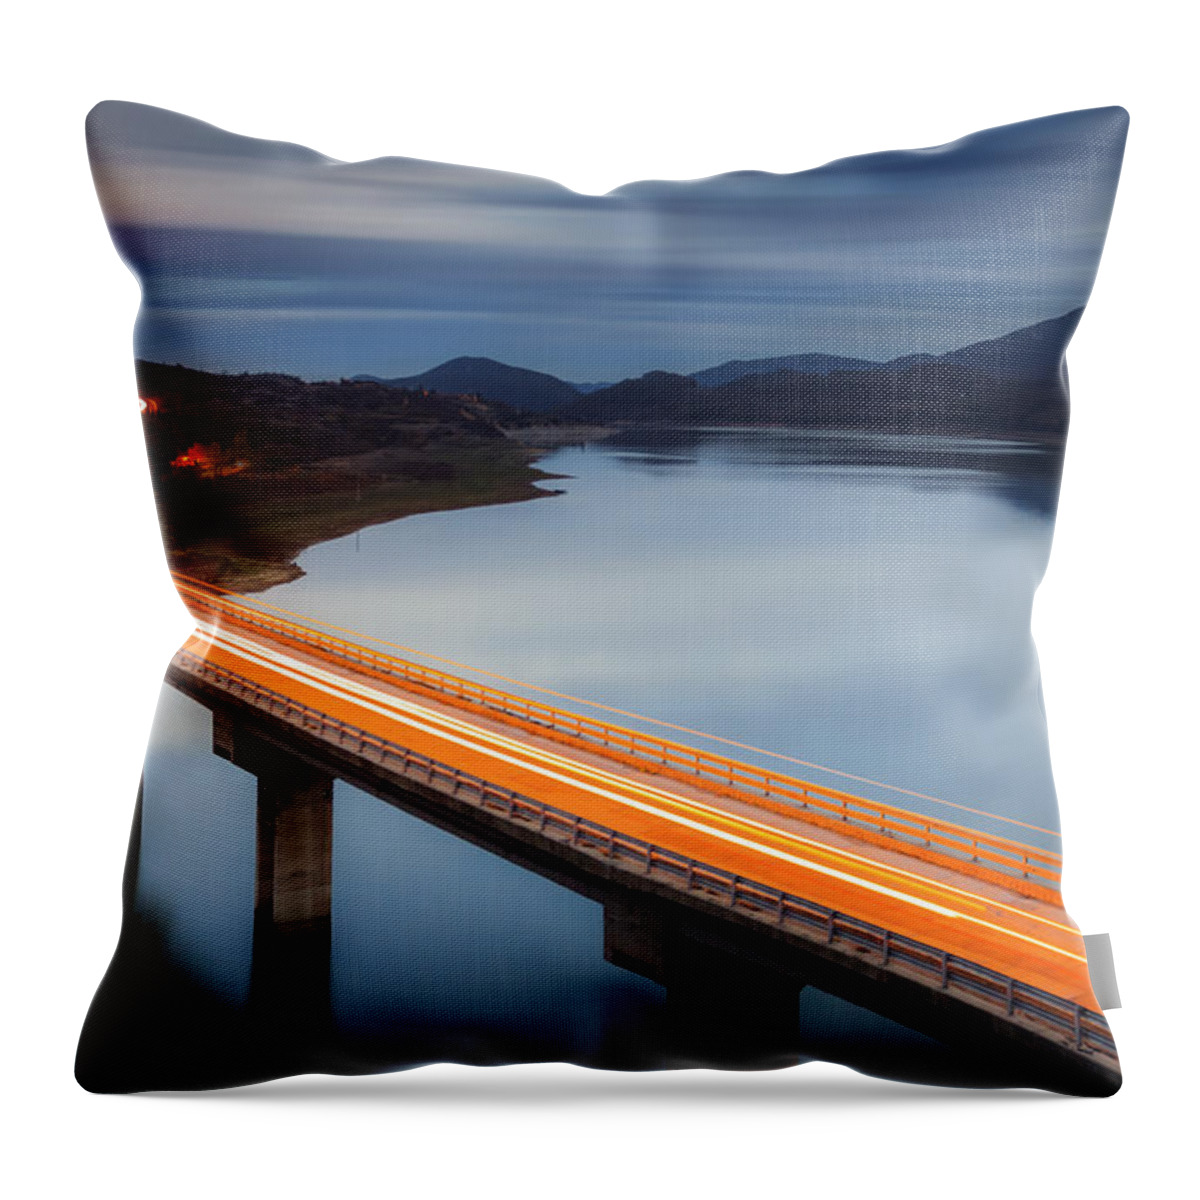 Bulgaria Throw Pillow featuring the photograph Glowing Bridge by Evgeni Dinev